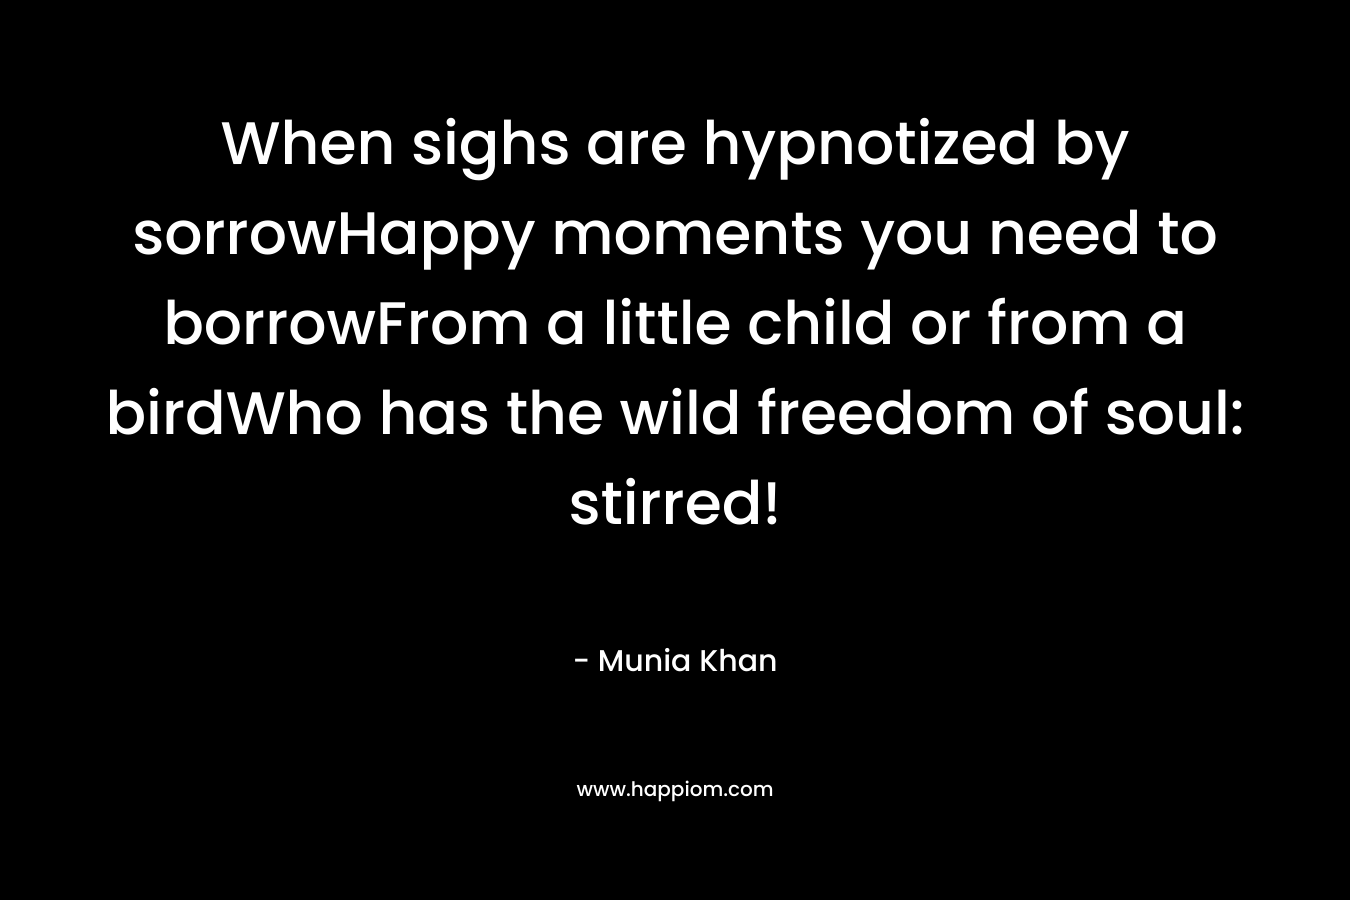 When sighs are hypnotized by sorrowHappy moments you need to borrowFrom a little child or from a birdWho has the wild freedom of soul: stirred! – Munia Khan